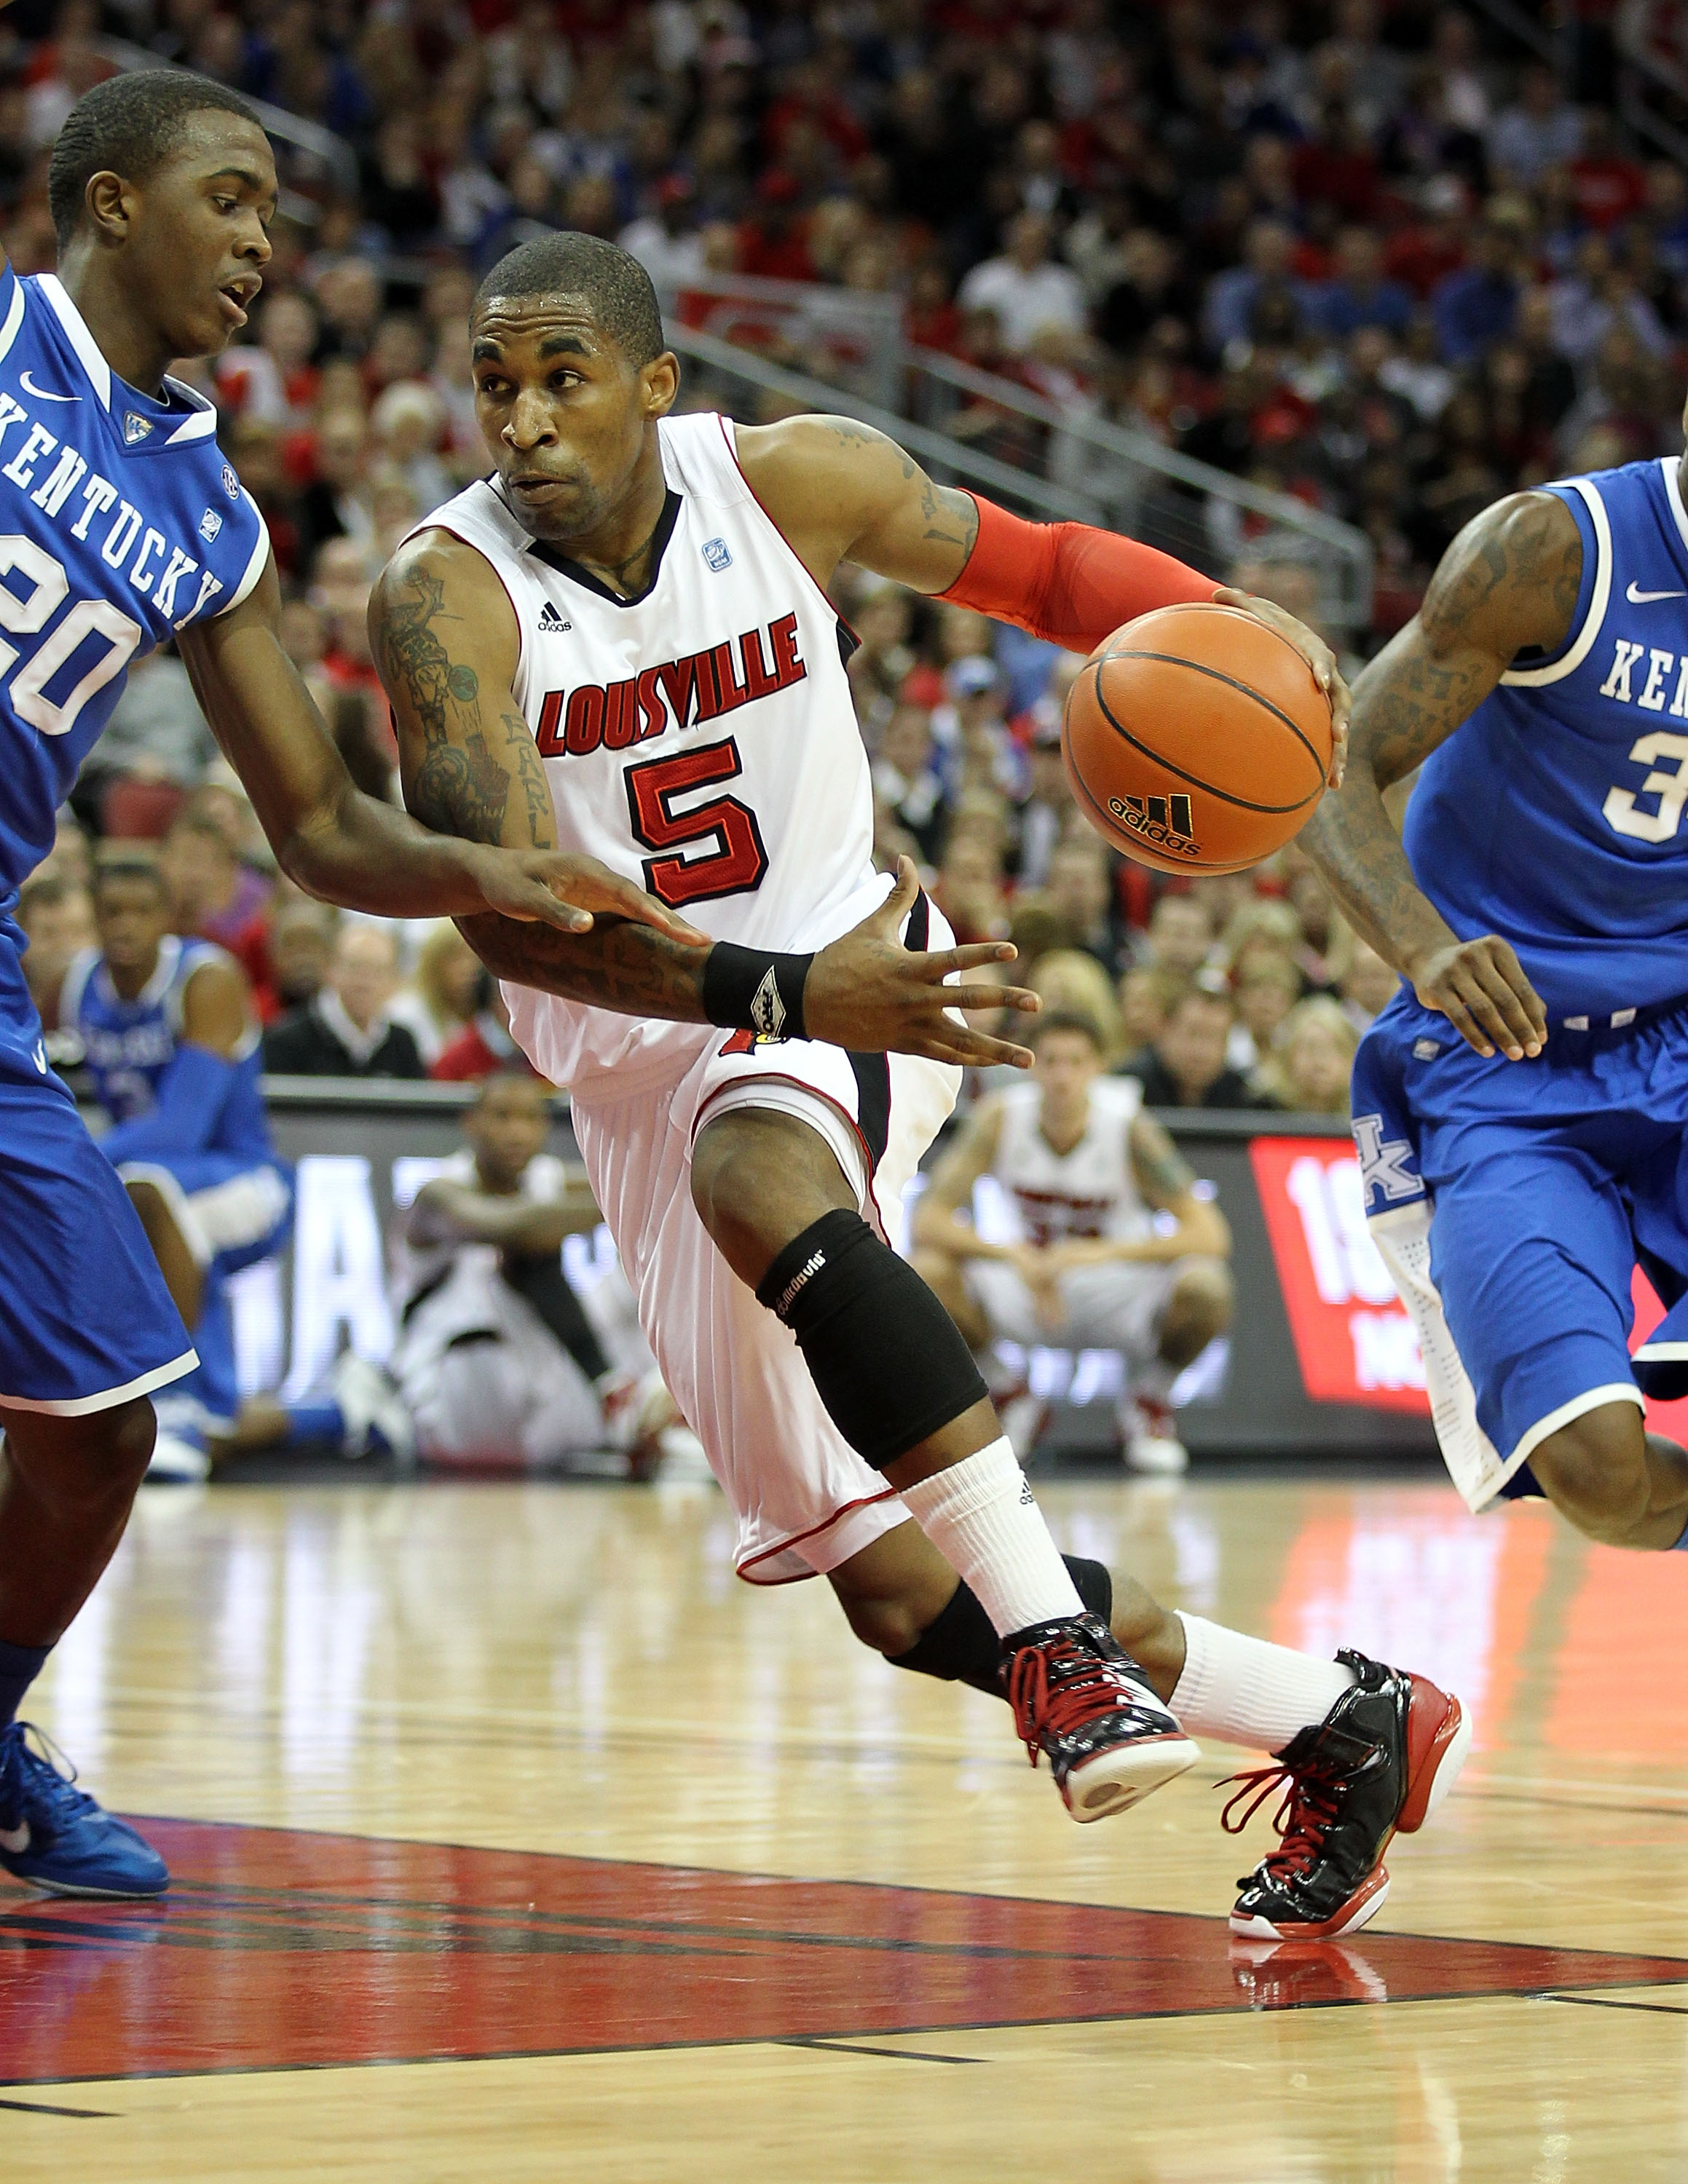 LOUISVILLE, KY - DECEMBER 31:  Chris Smith #5 of the Louisville Cardinals dribbles the ball during the game against the Kentucky Wildcats at the KFC Yum! Center on December 31, 2010 in Louisville, Kentucky. Kentucky won 78-63.  (Photo by Andy Lyons/Getty